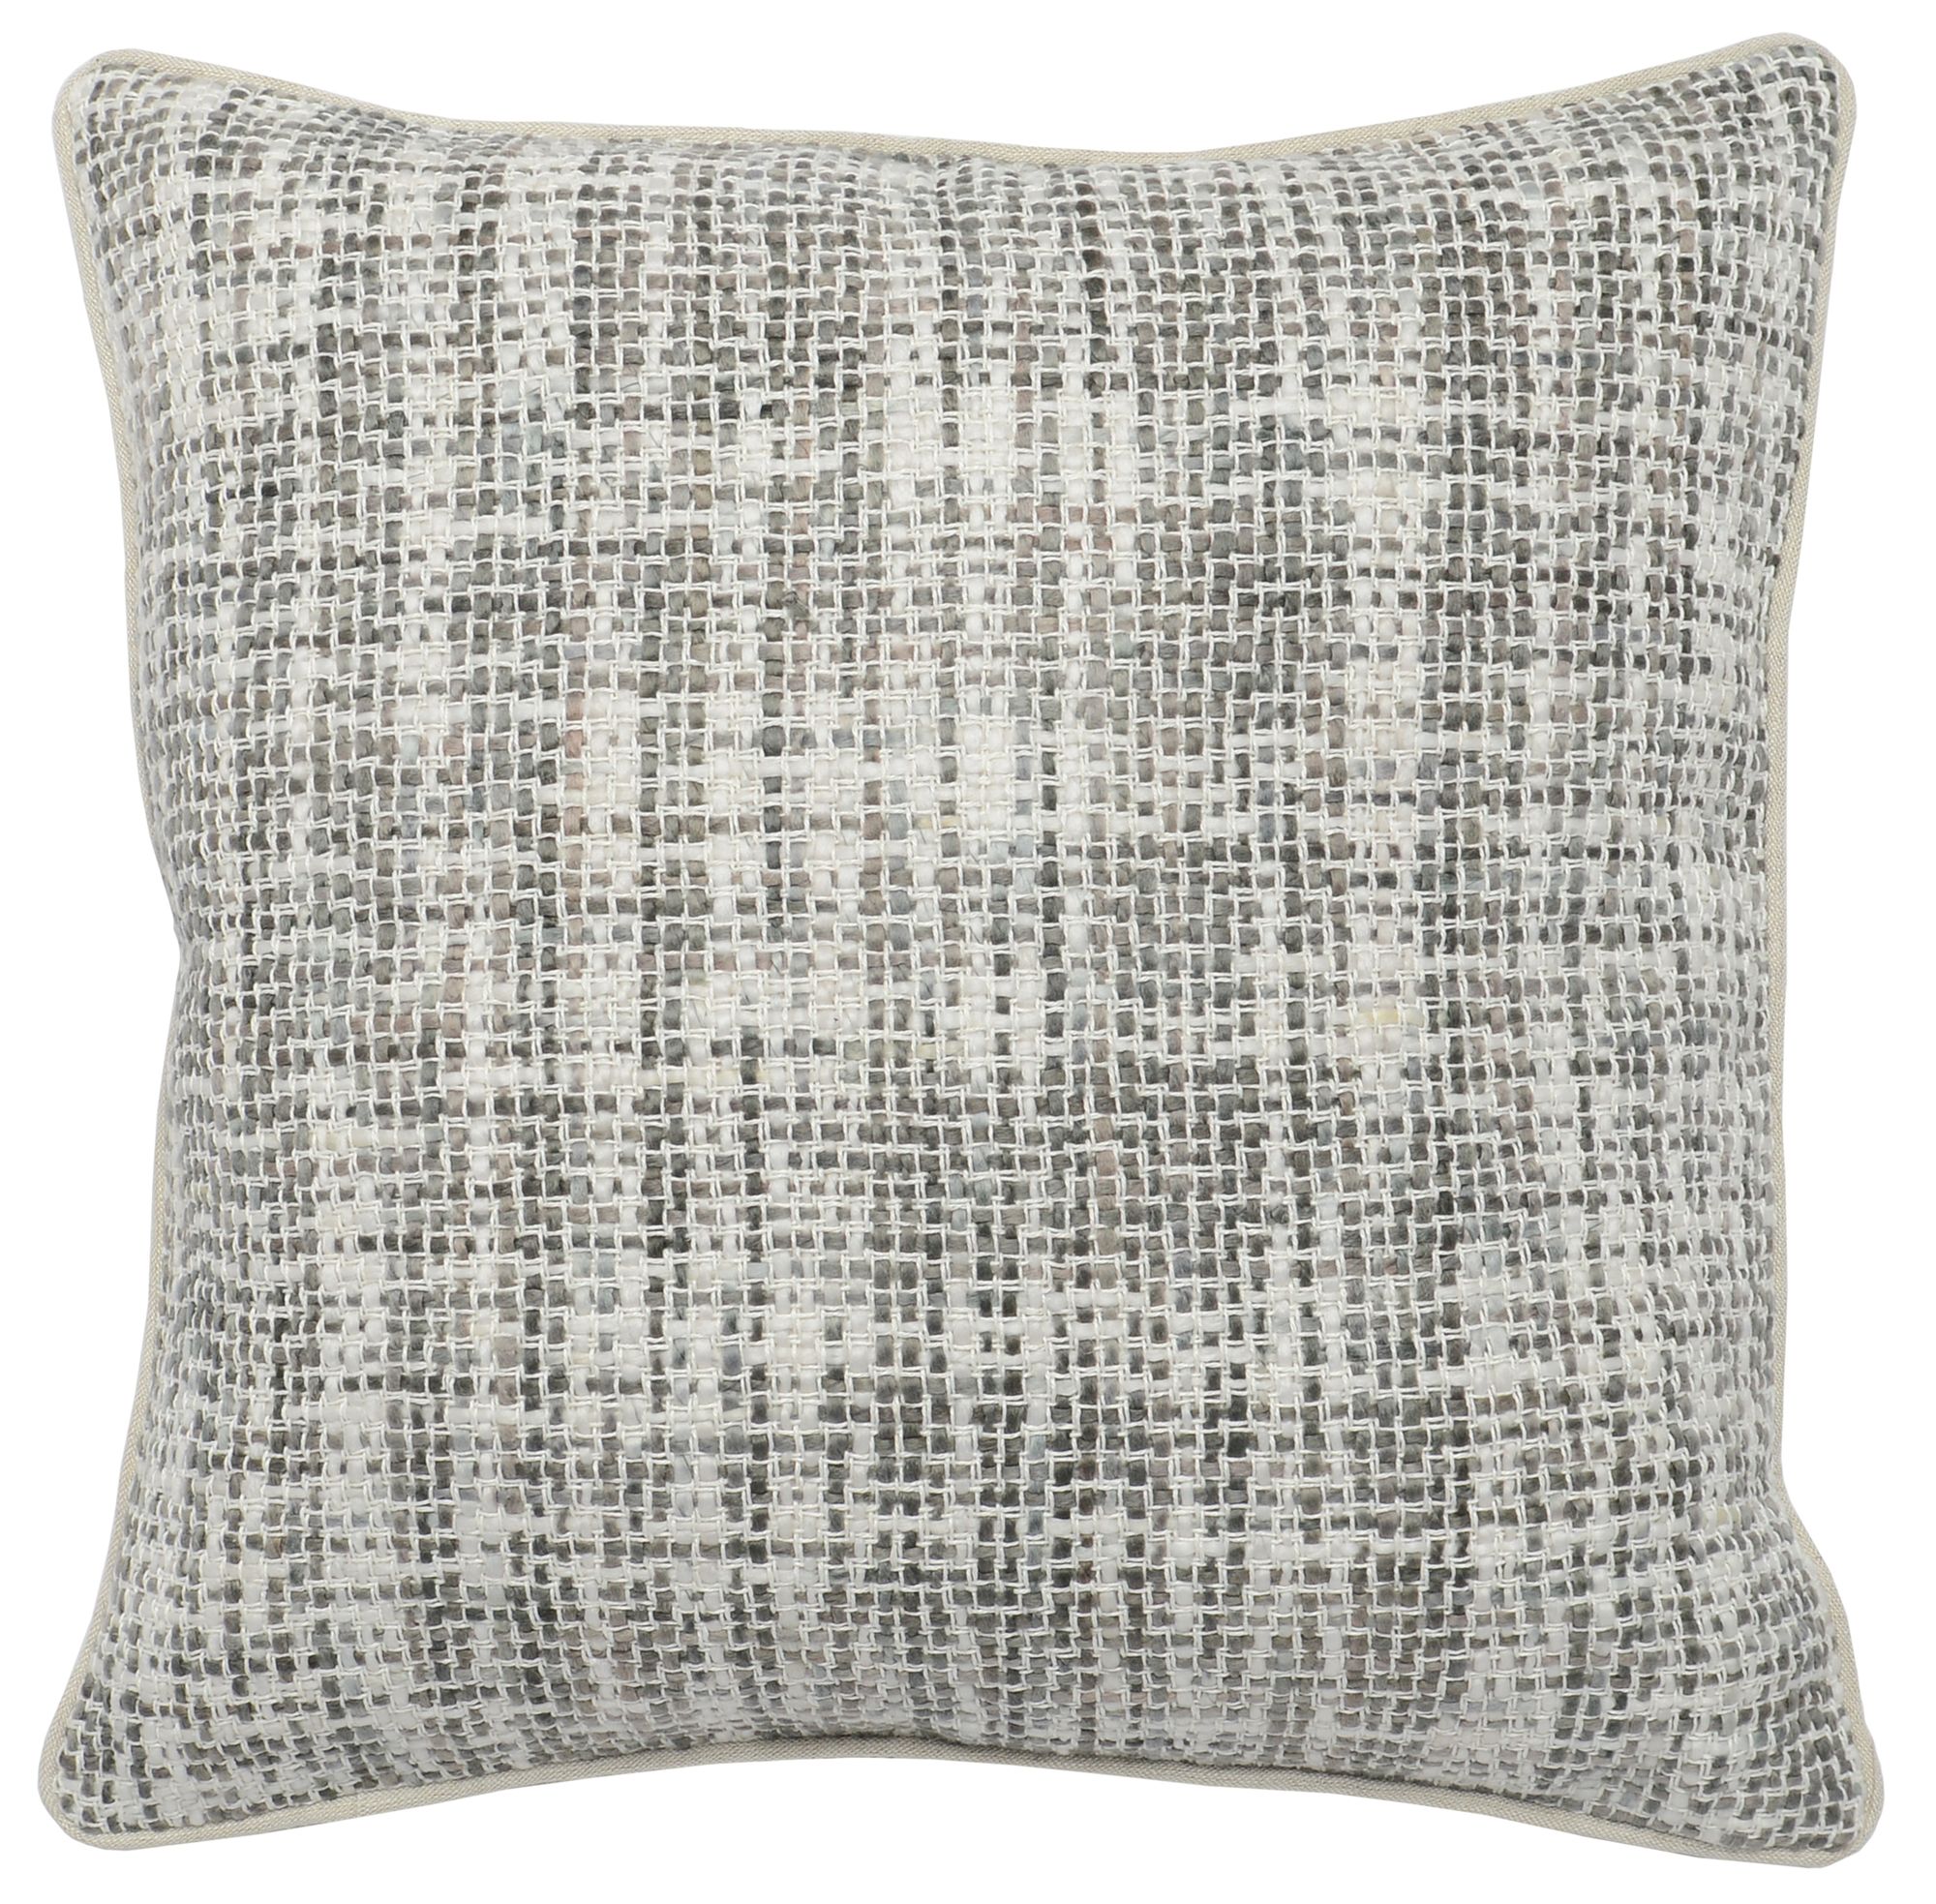 VIOLA  Grey, Teal, And Brown Patterned Throw Pillow